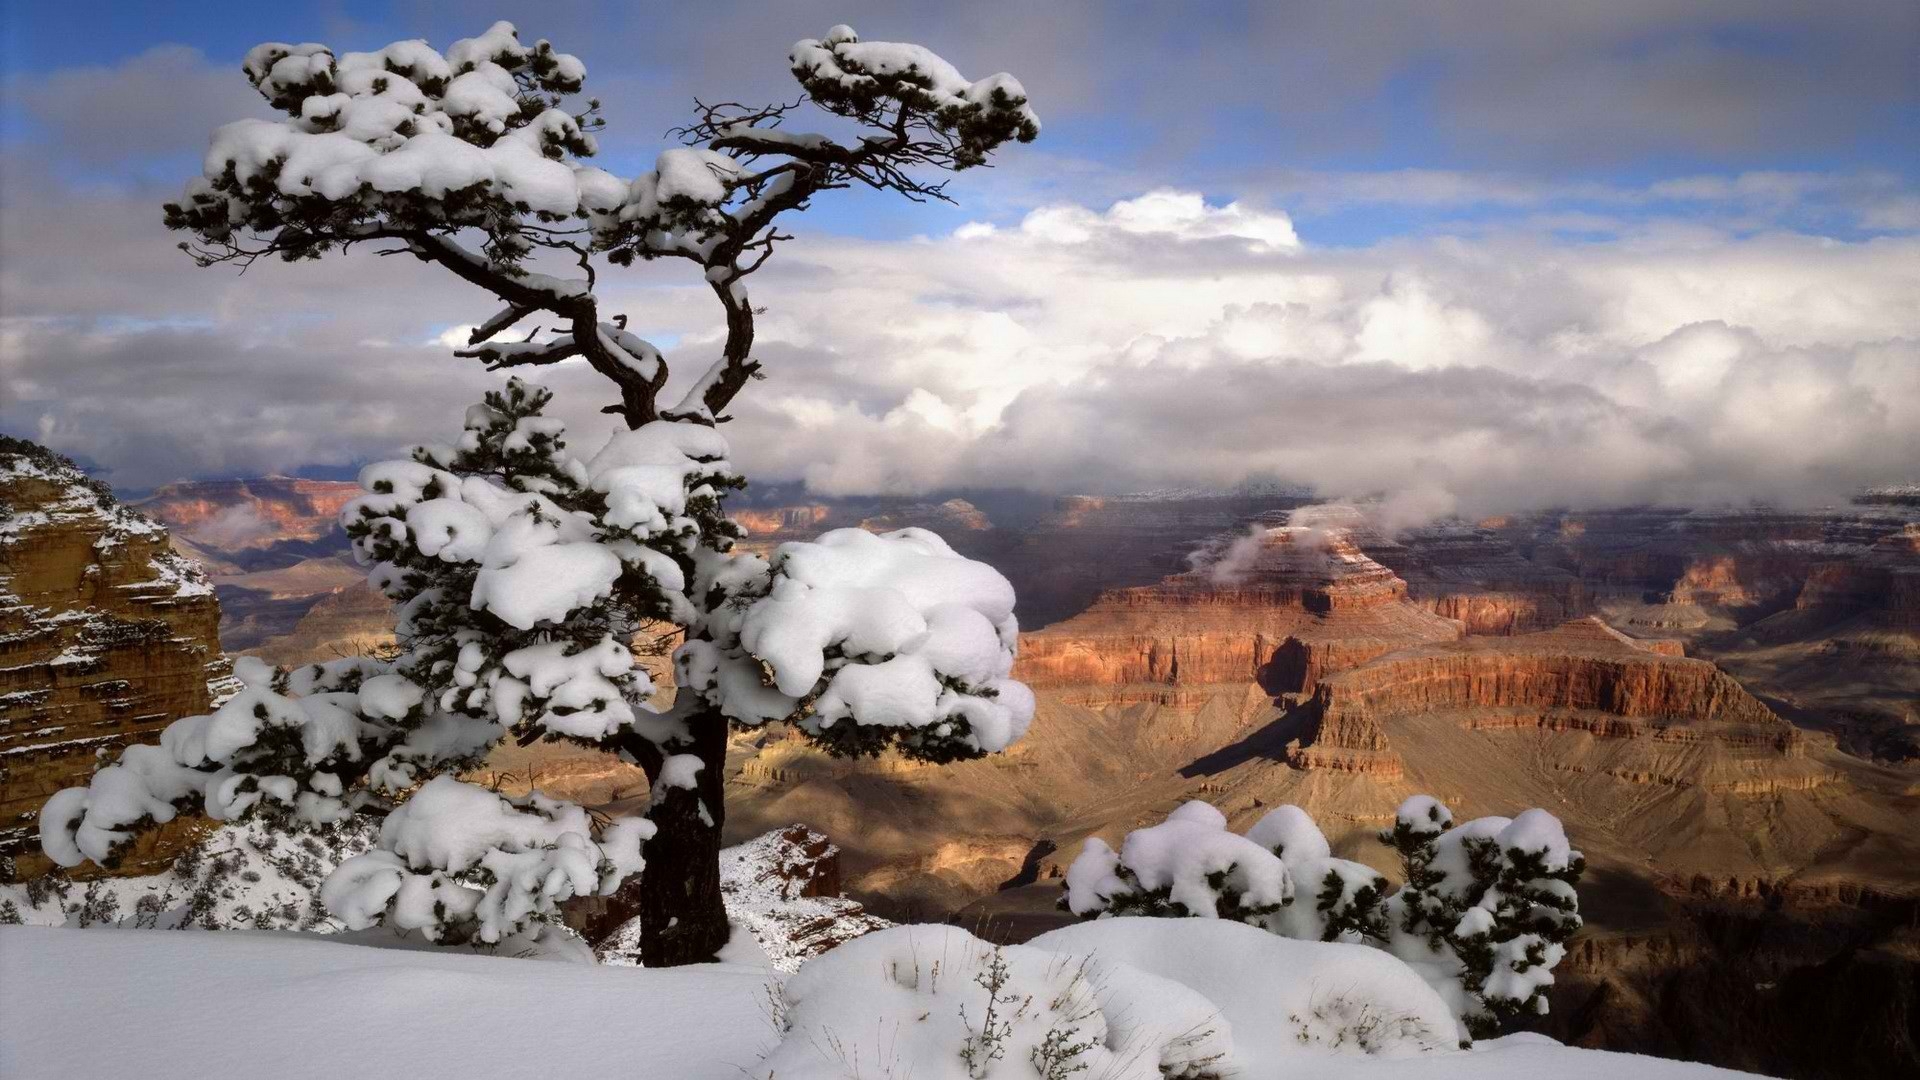 Download Wallpaper, Download 2560x1440 light world point arizona grand canyon morning national park 1920x1080 wallpaper People HD Wallpaper, Hi Res People Wallpaper, High Definition Wallpaper